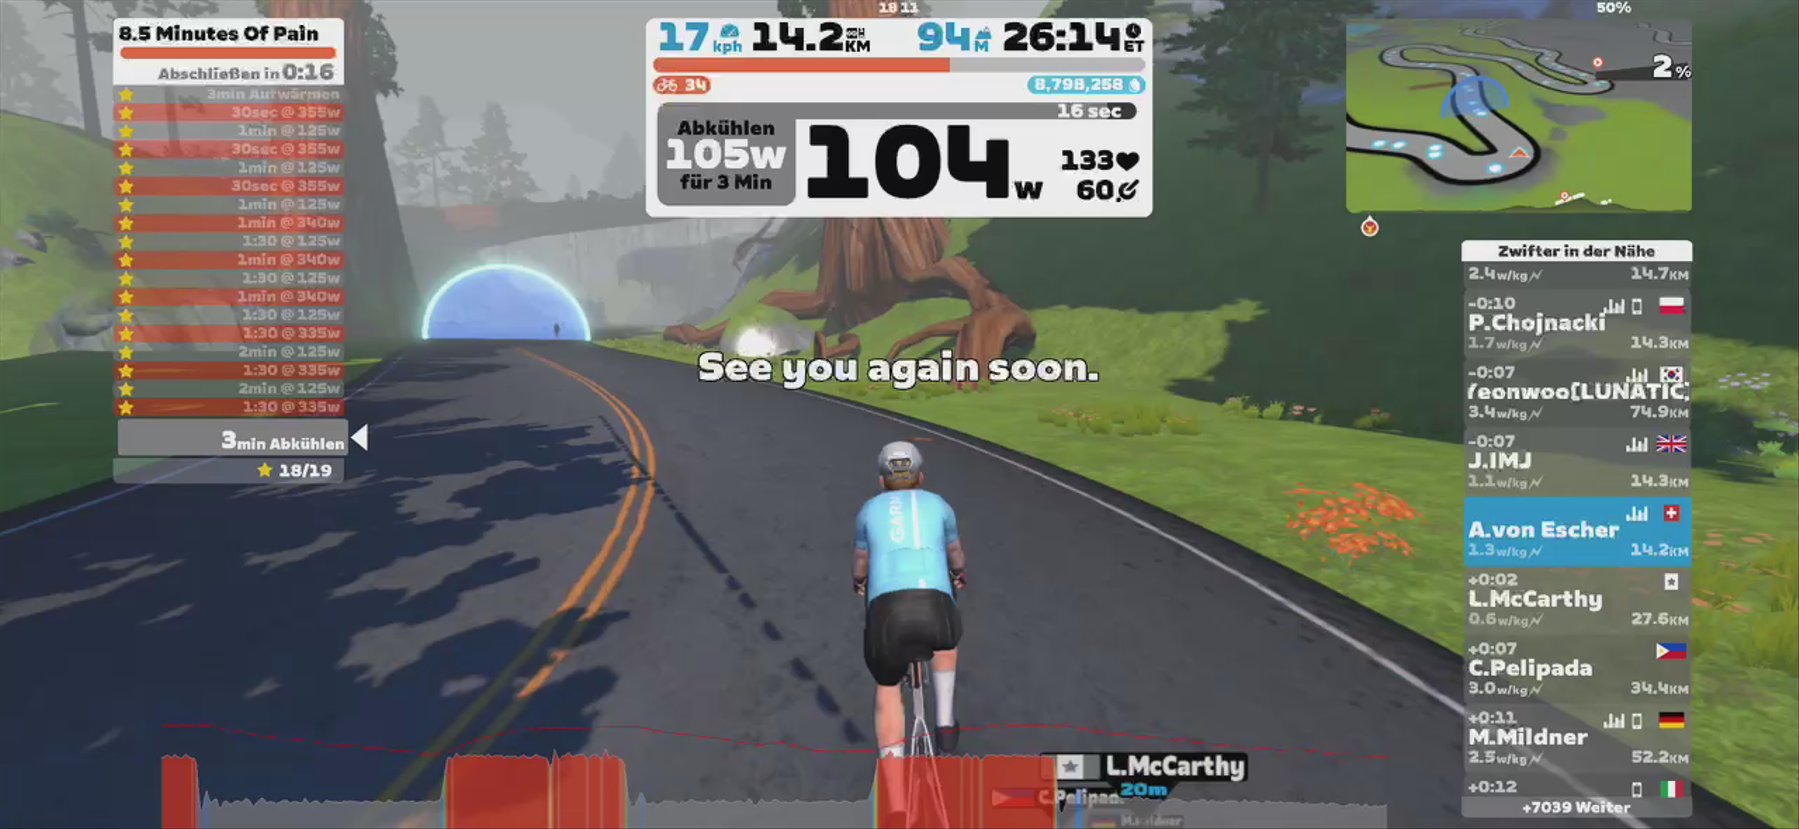 Zwift - Le Col - Training With Legends - Dame Sarah Storey - 8.5 Minutes Of Pain in Watopia